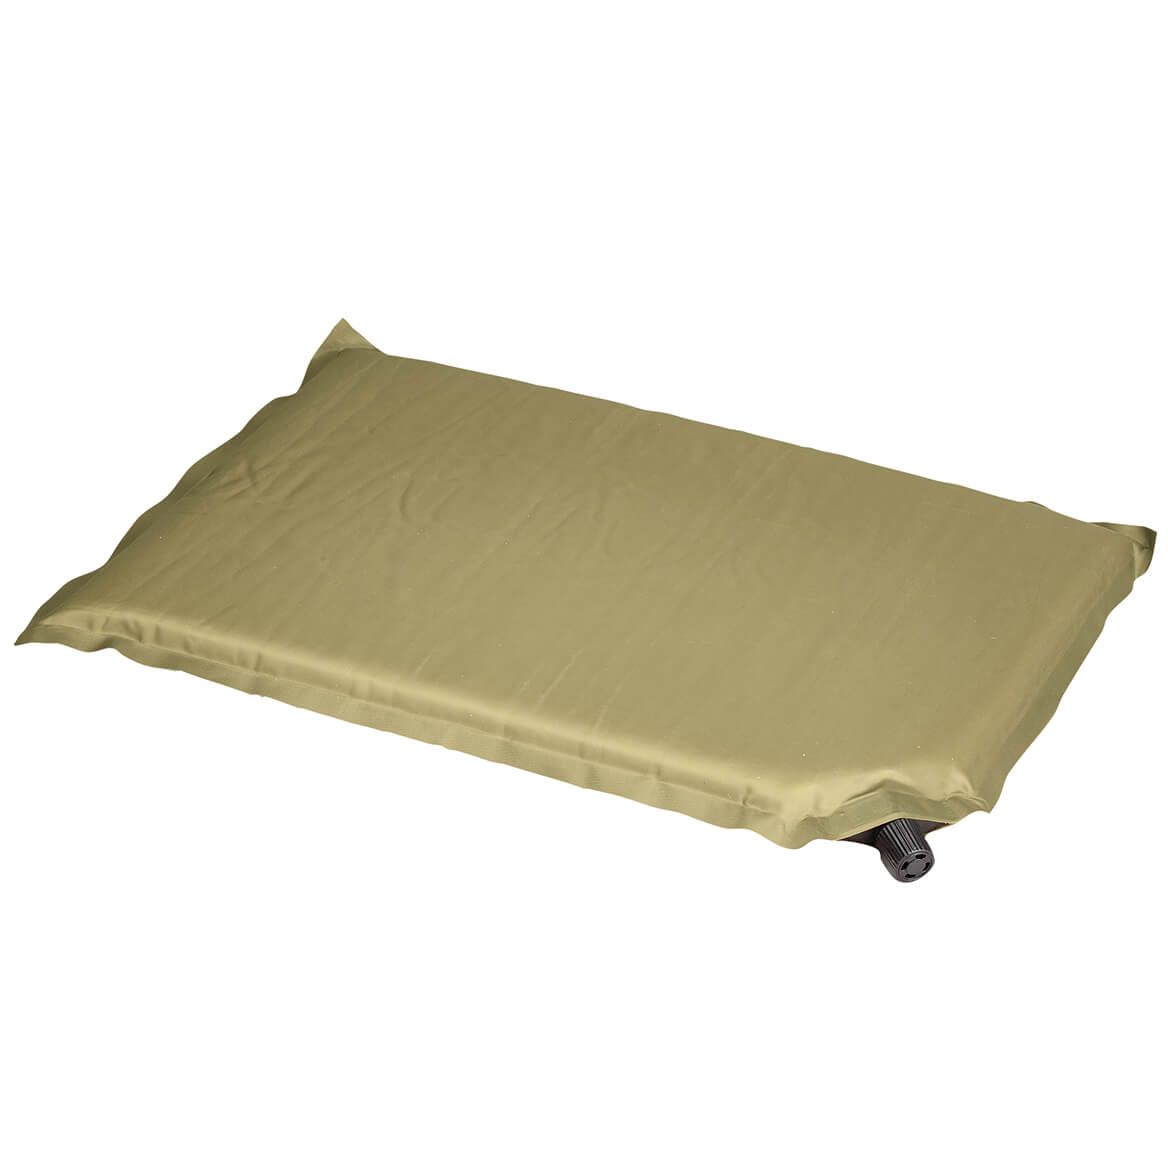 Self-Inflating Cushion with Carrying Case by LivingSURE™ + '-' + 375099